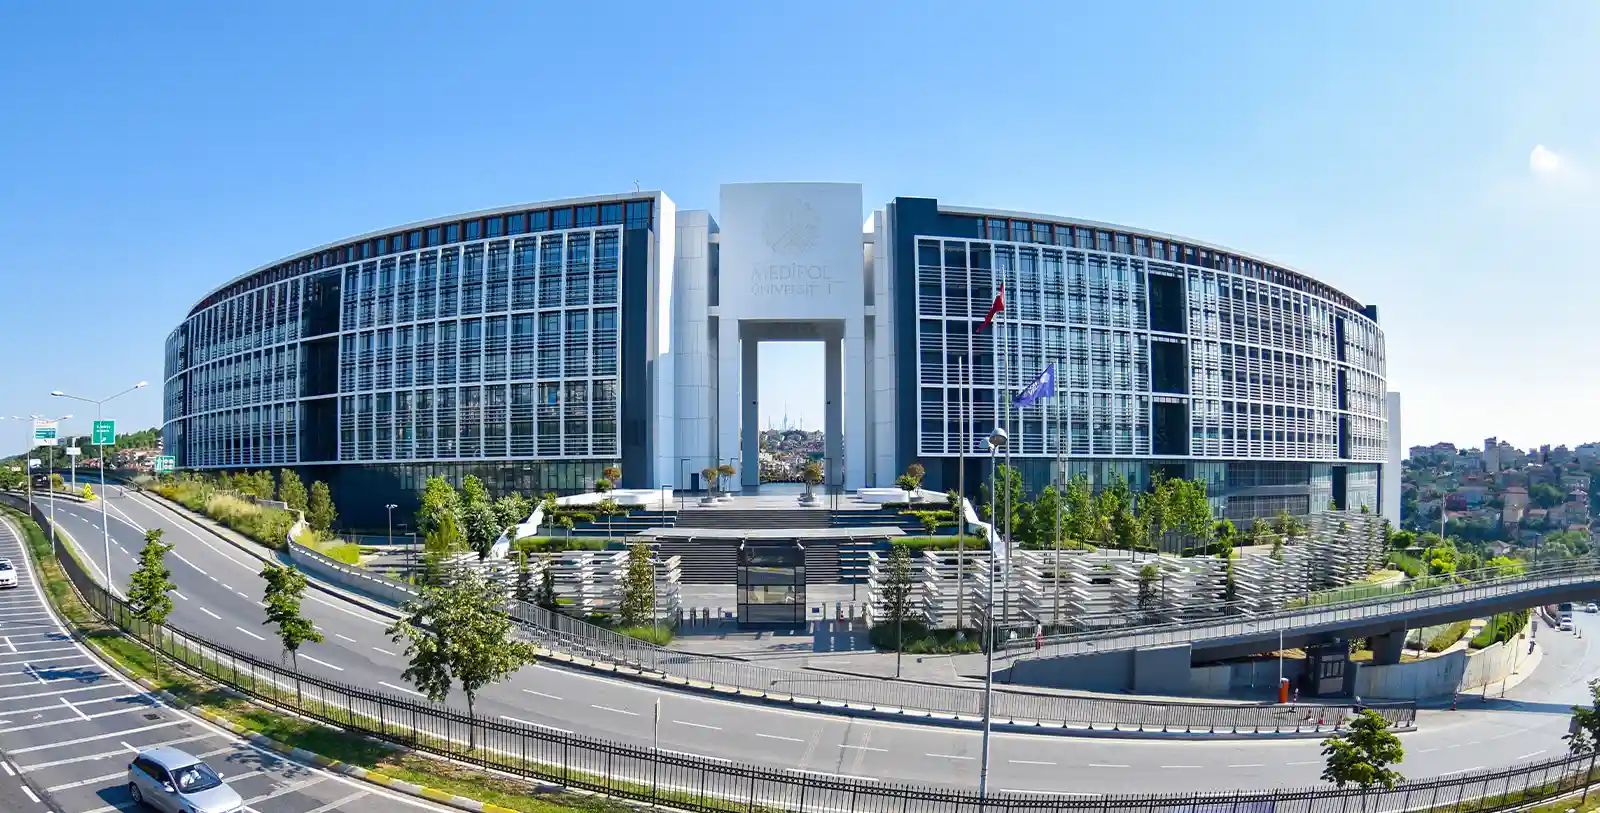 Istanbul Medipol University is a reputable foundation university in Turkey